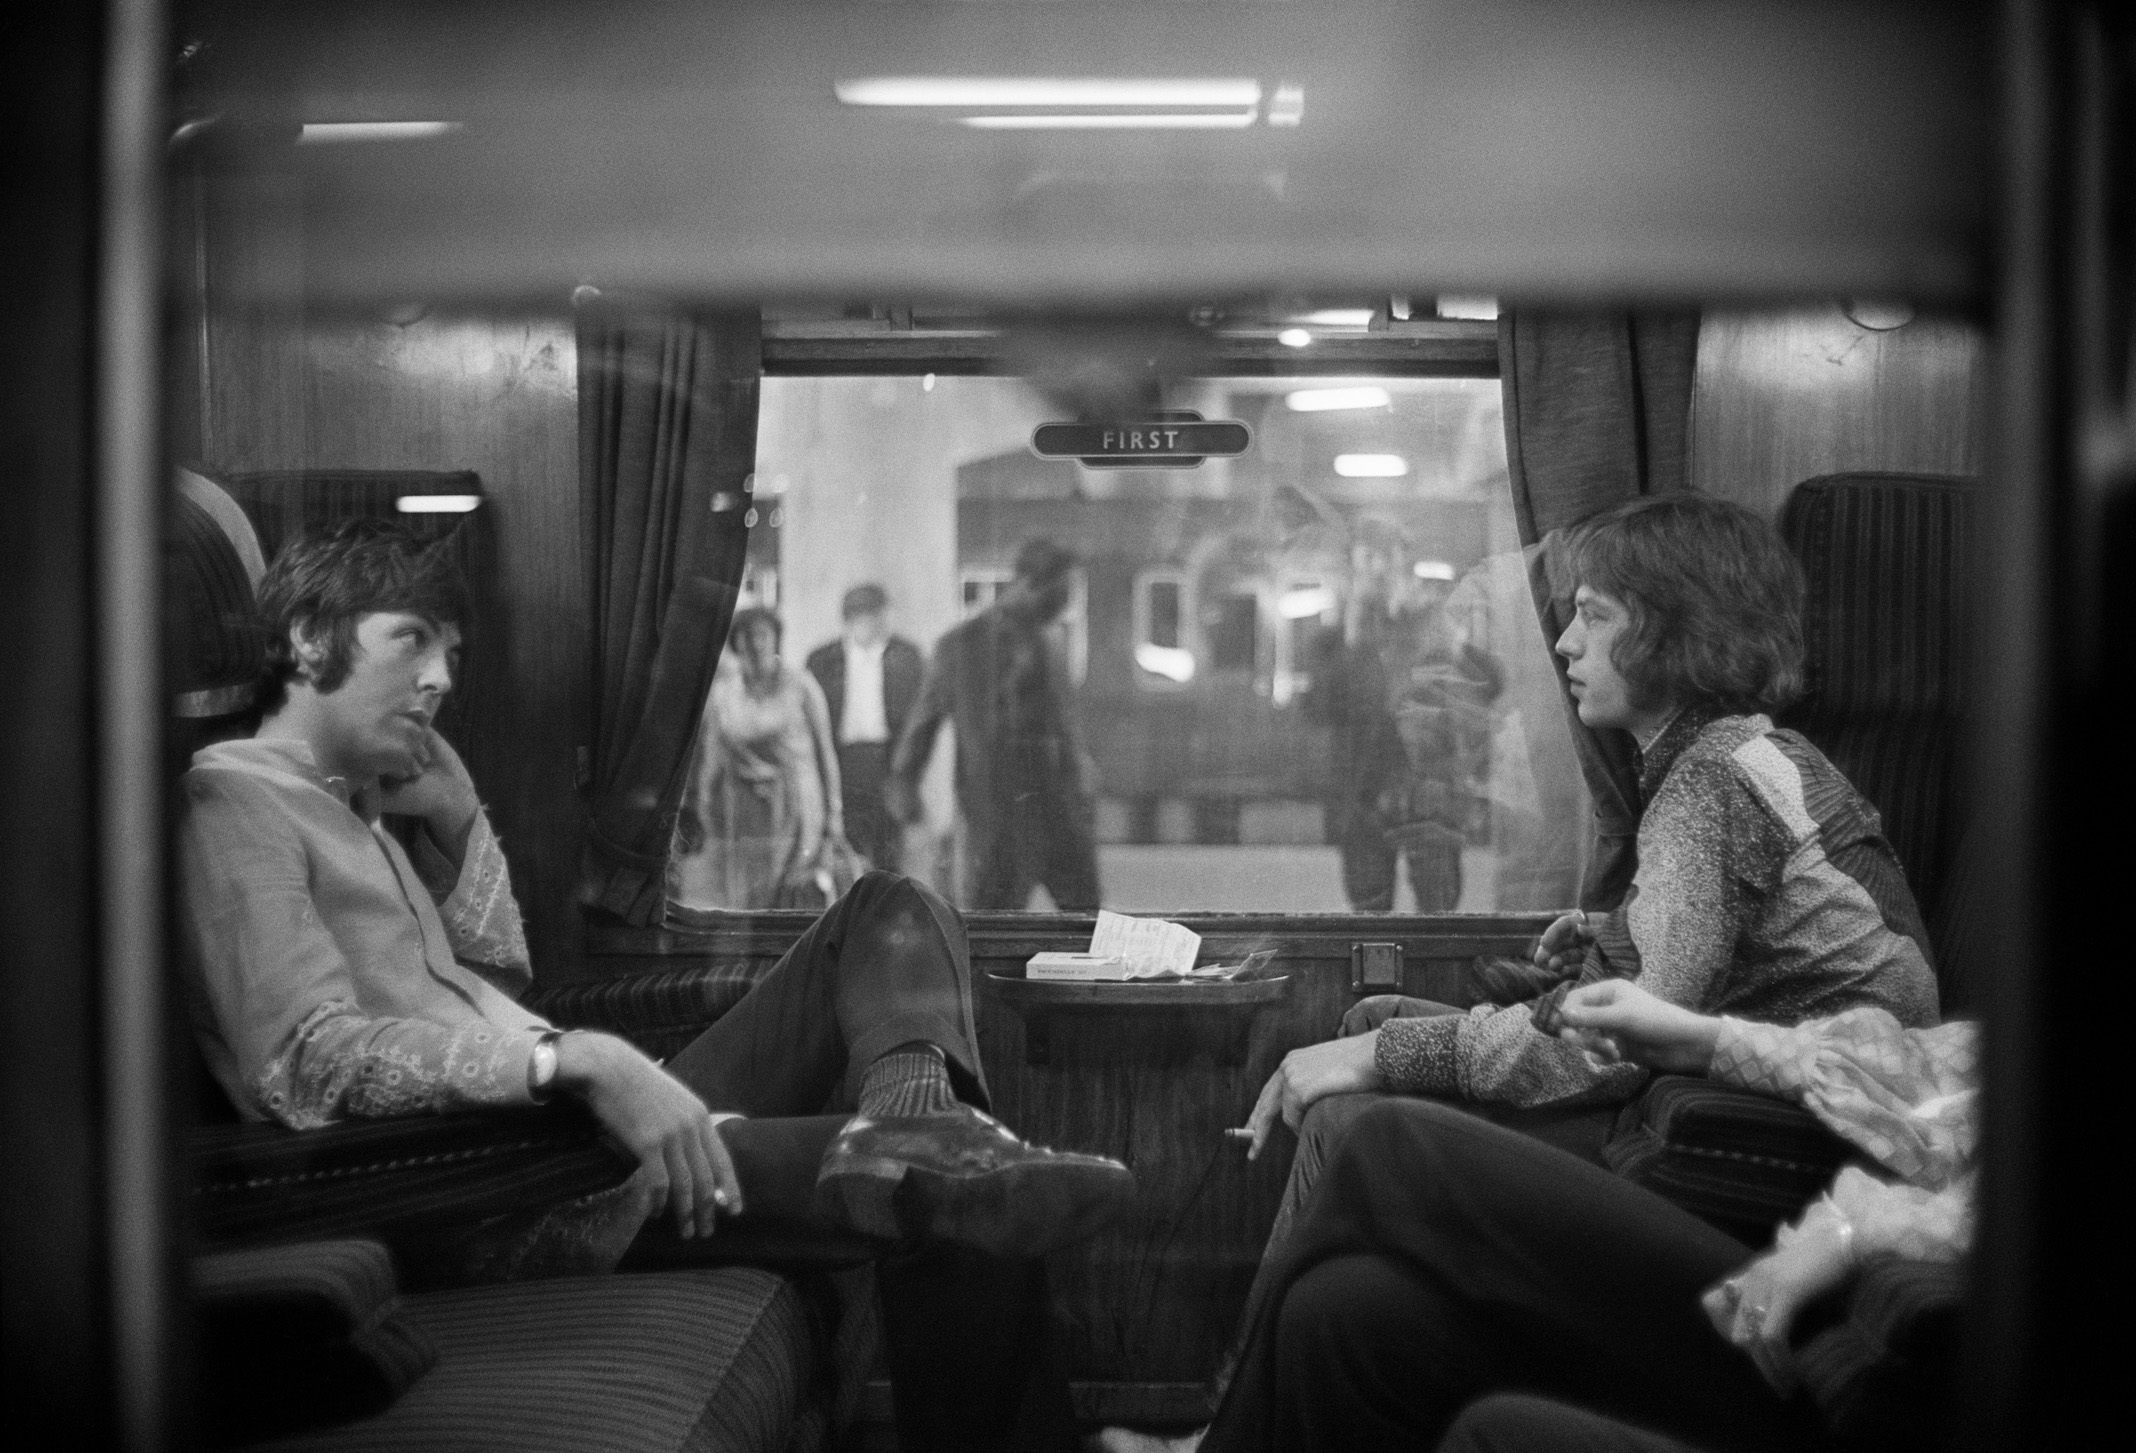 Paul McCartney of The Beatles and Mick Jagger of The Rolling Stones sit across from each other on a train